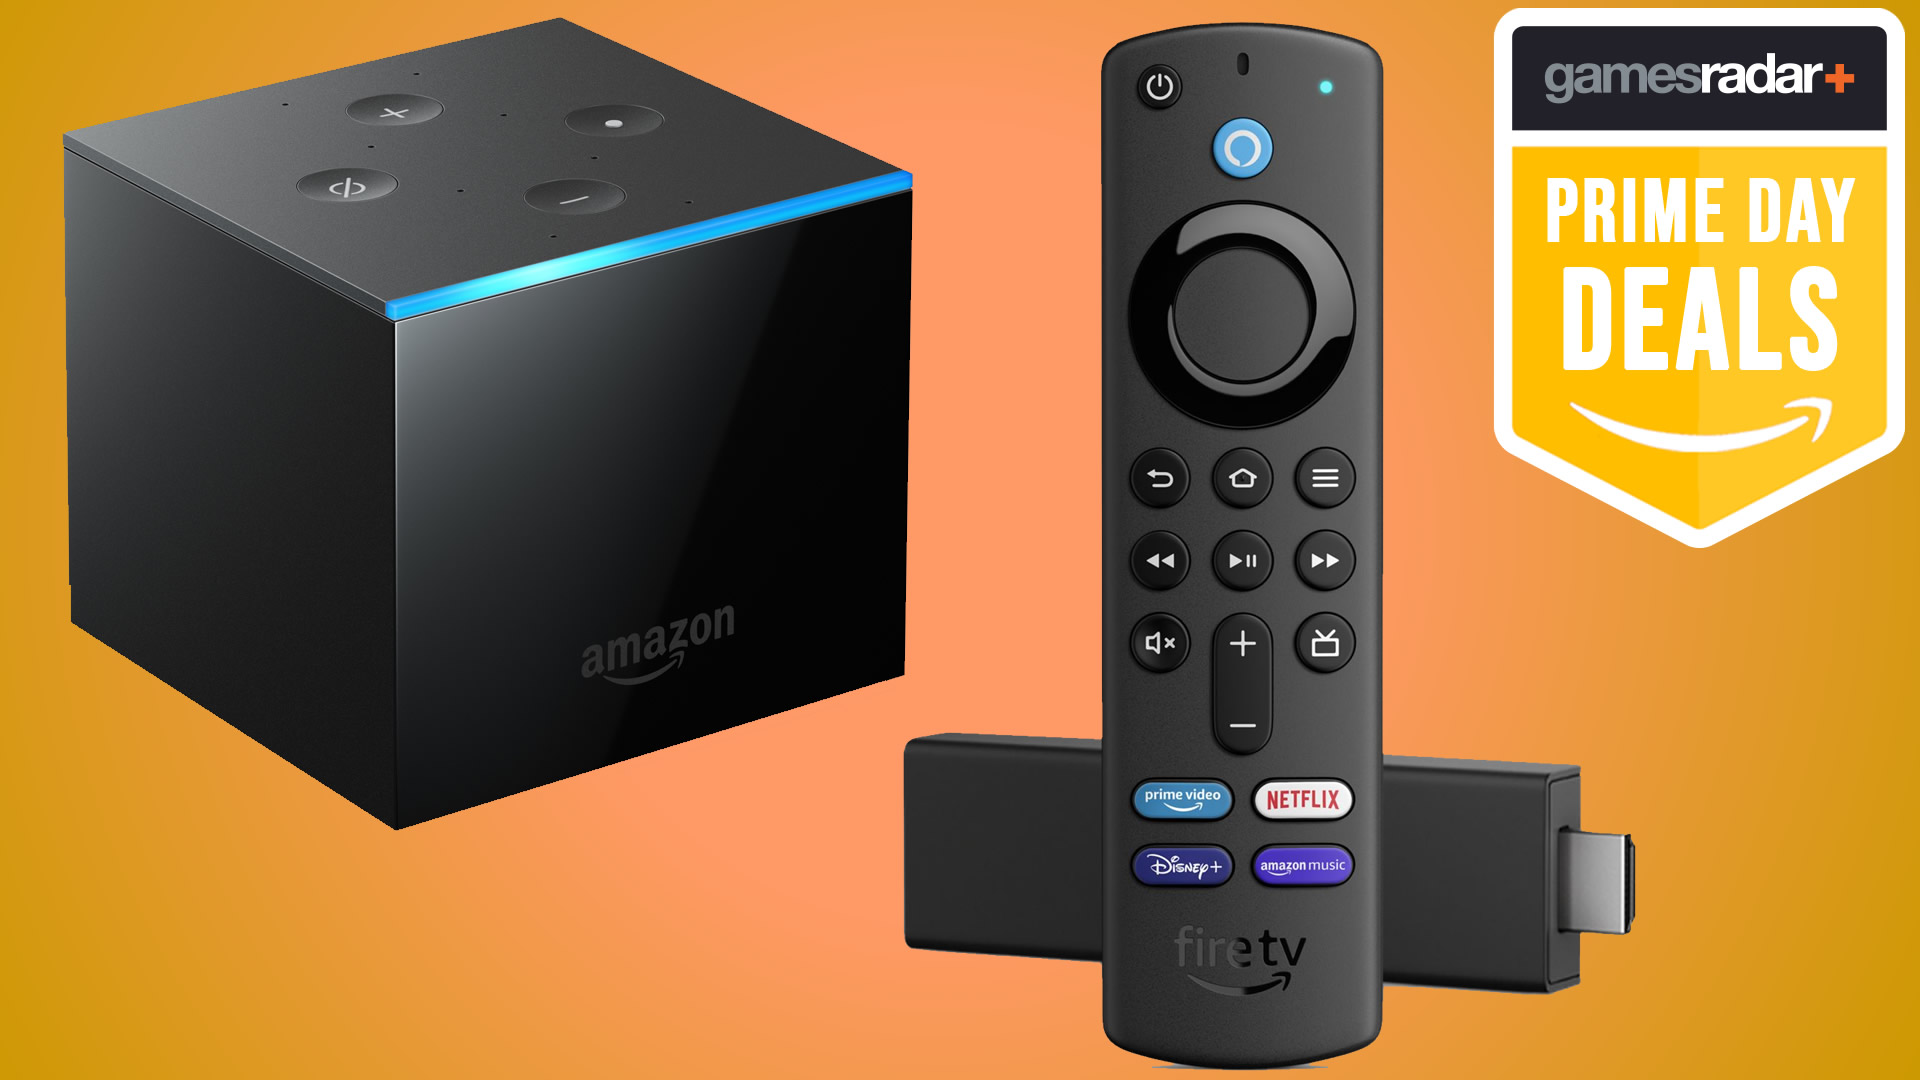 Enter to Win Tubi's Daily Prizes, Including an  Fire TV 4K with Alexa  Voice Remote